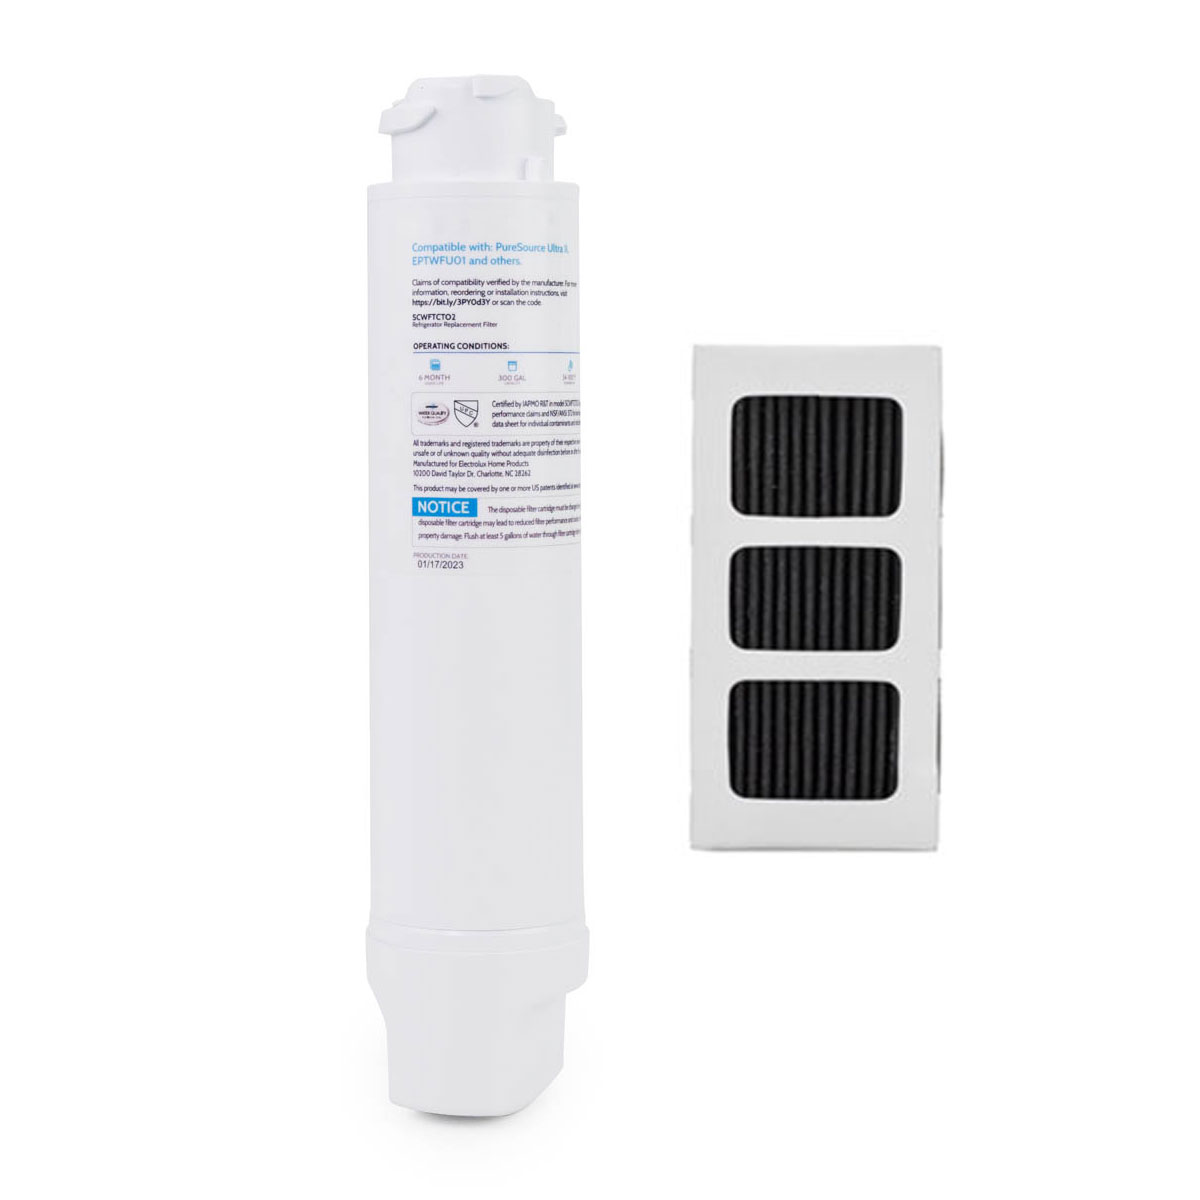 Smartchoice Replacement Water Filter (EPTWFU01) and Air Filter (PAULTRA2) Combo